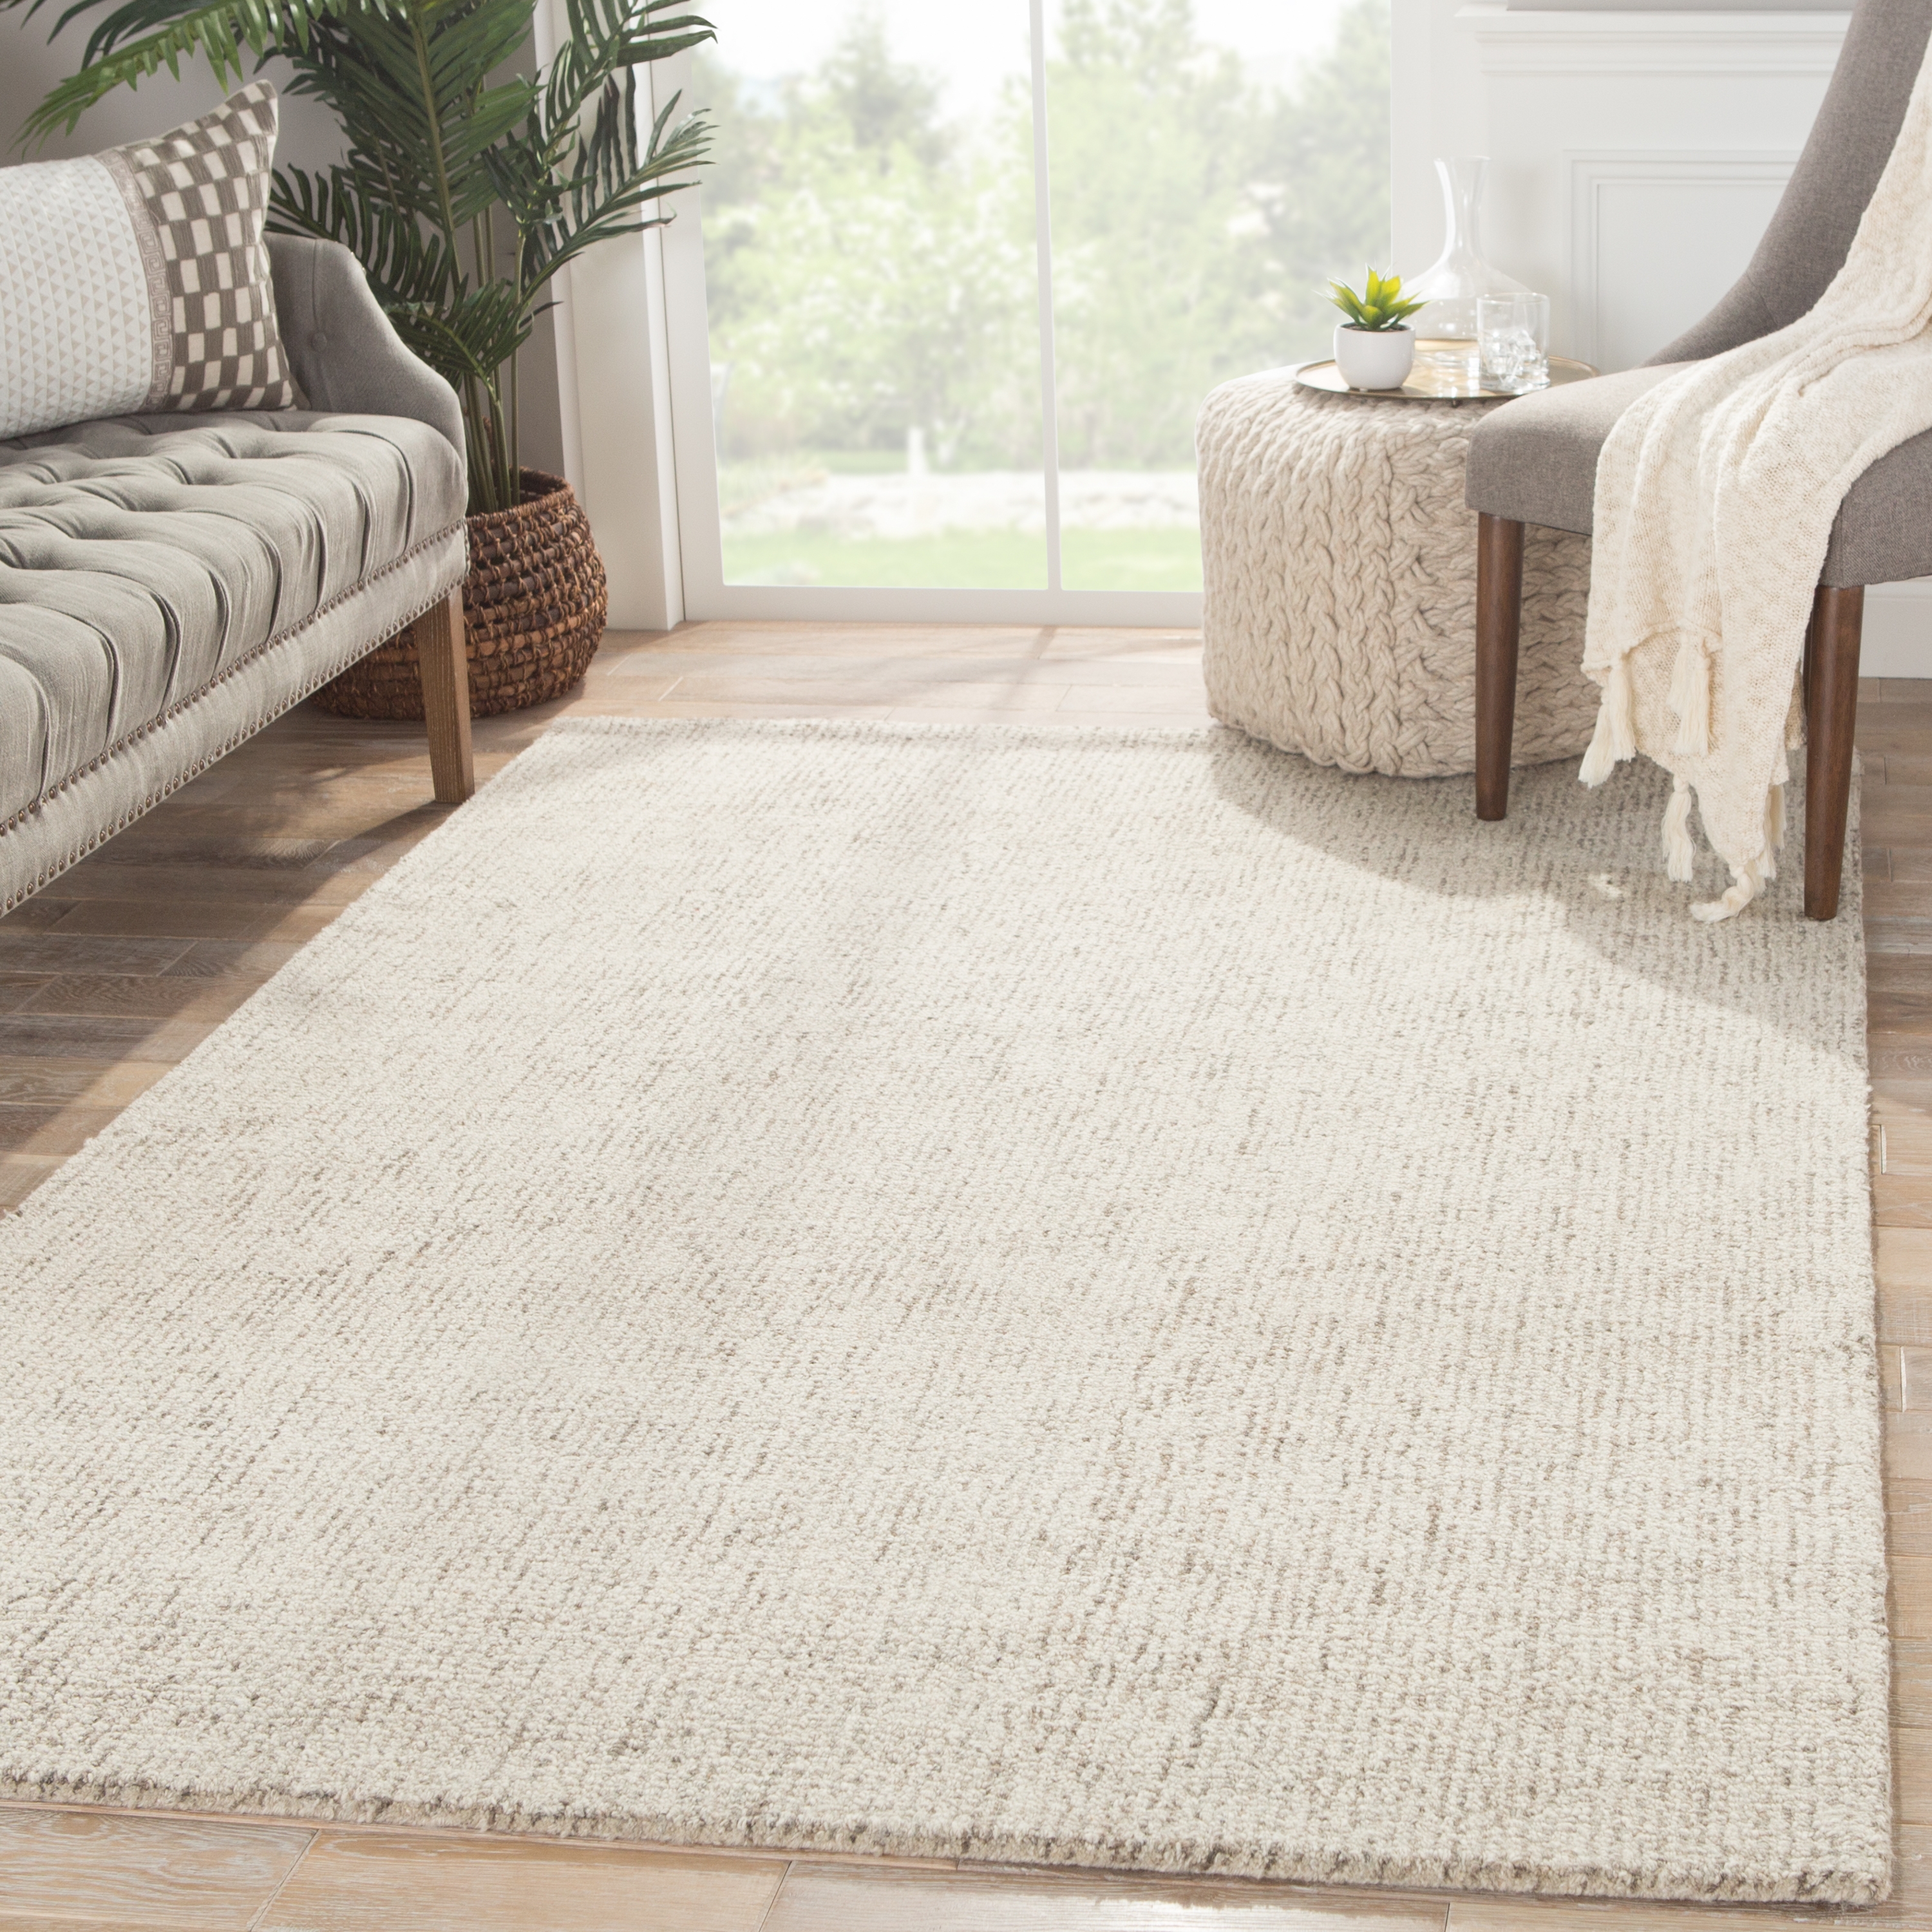 Oland Handmade Solid White/ Brown Area Rug (12'X15') - Image 4